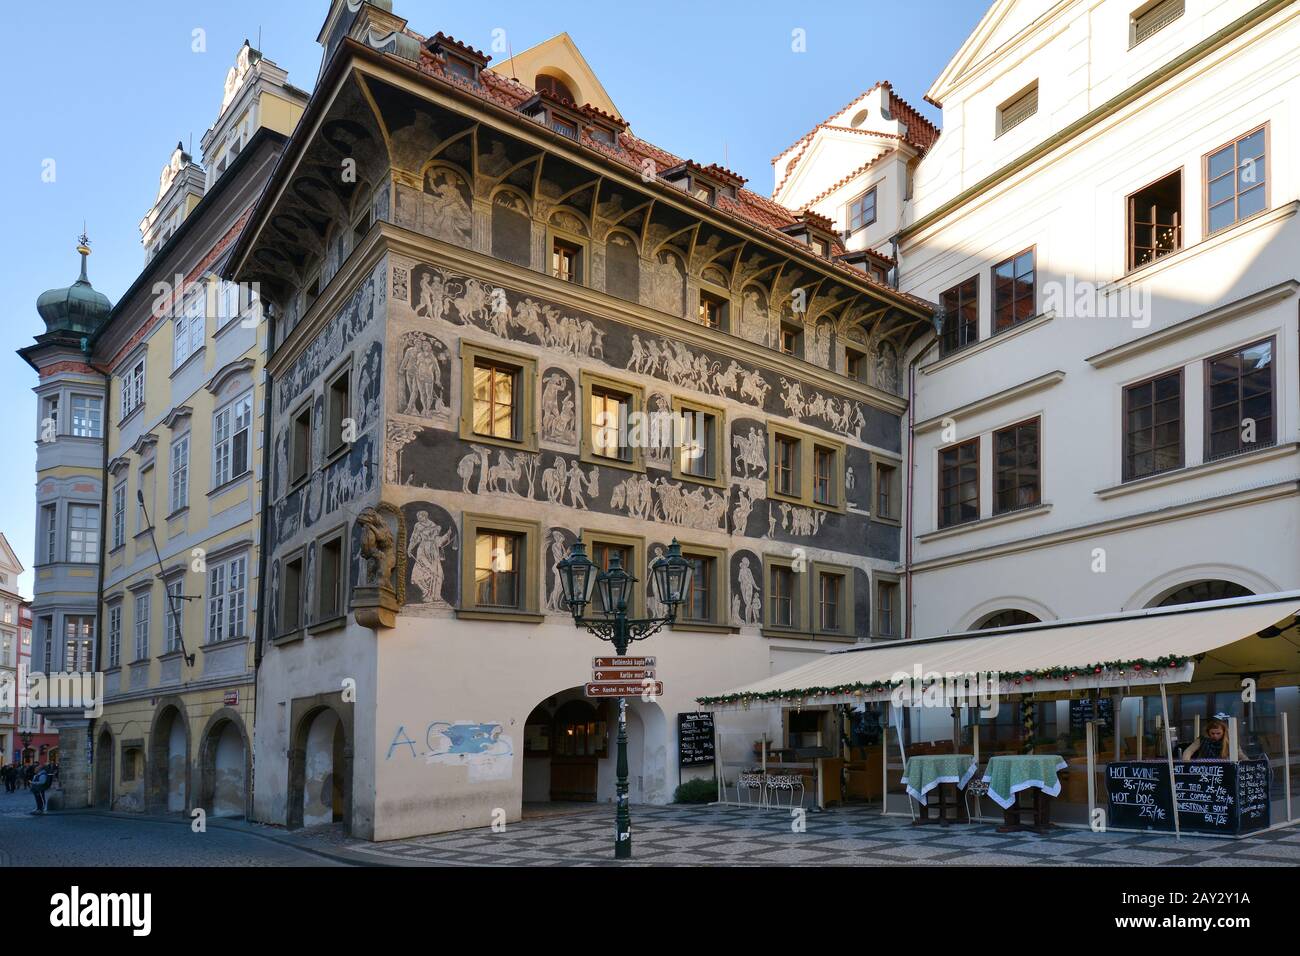 Prague, Czech Republic - December 3rd 2015: Building with sgraffito decorated facade on old town square Stock Photo